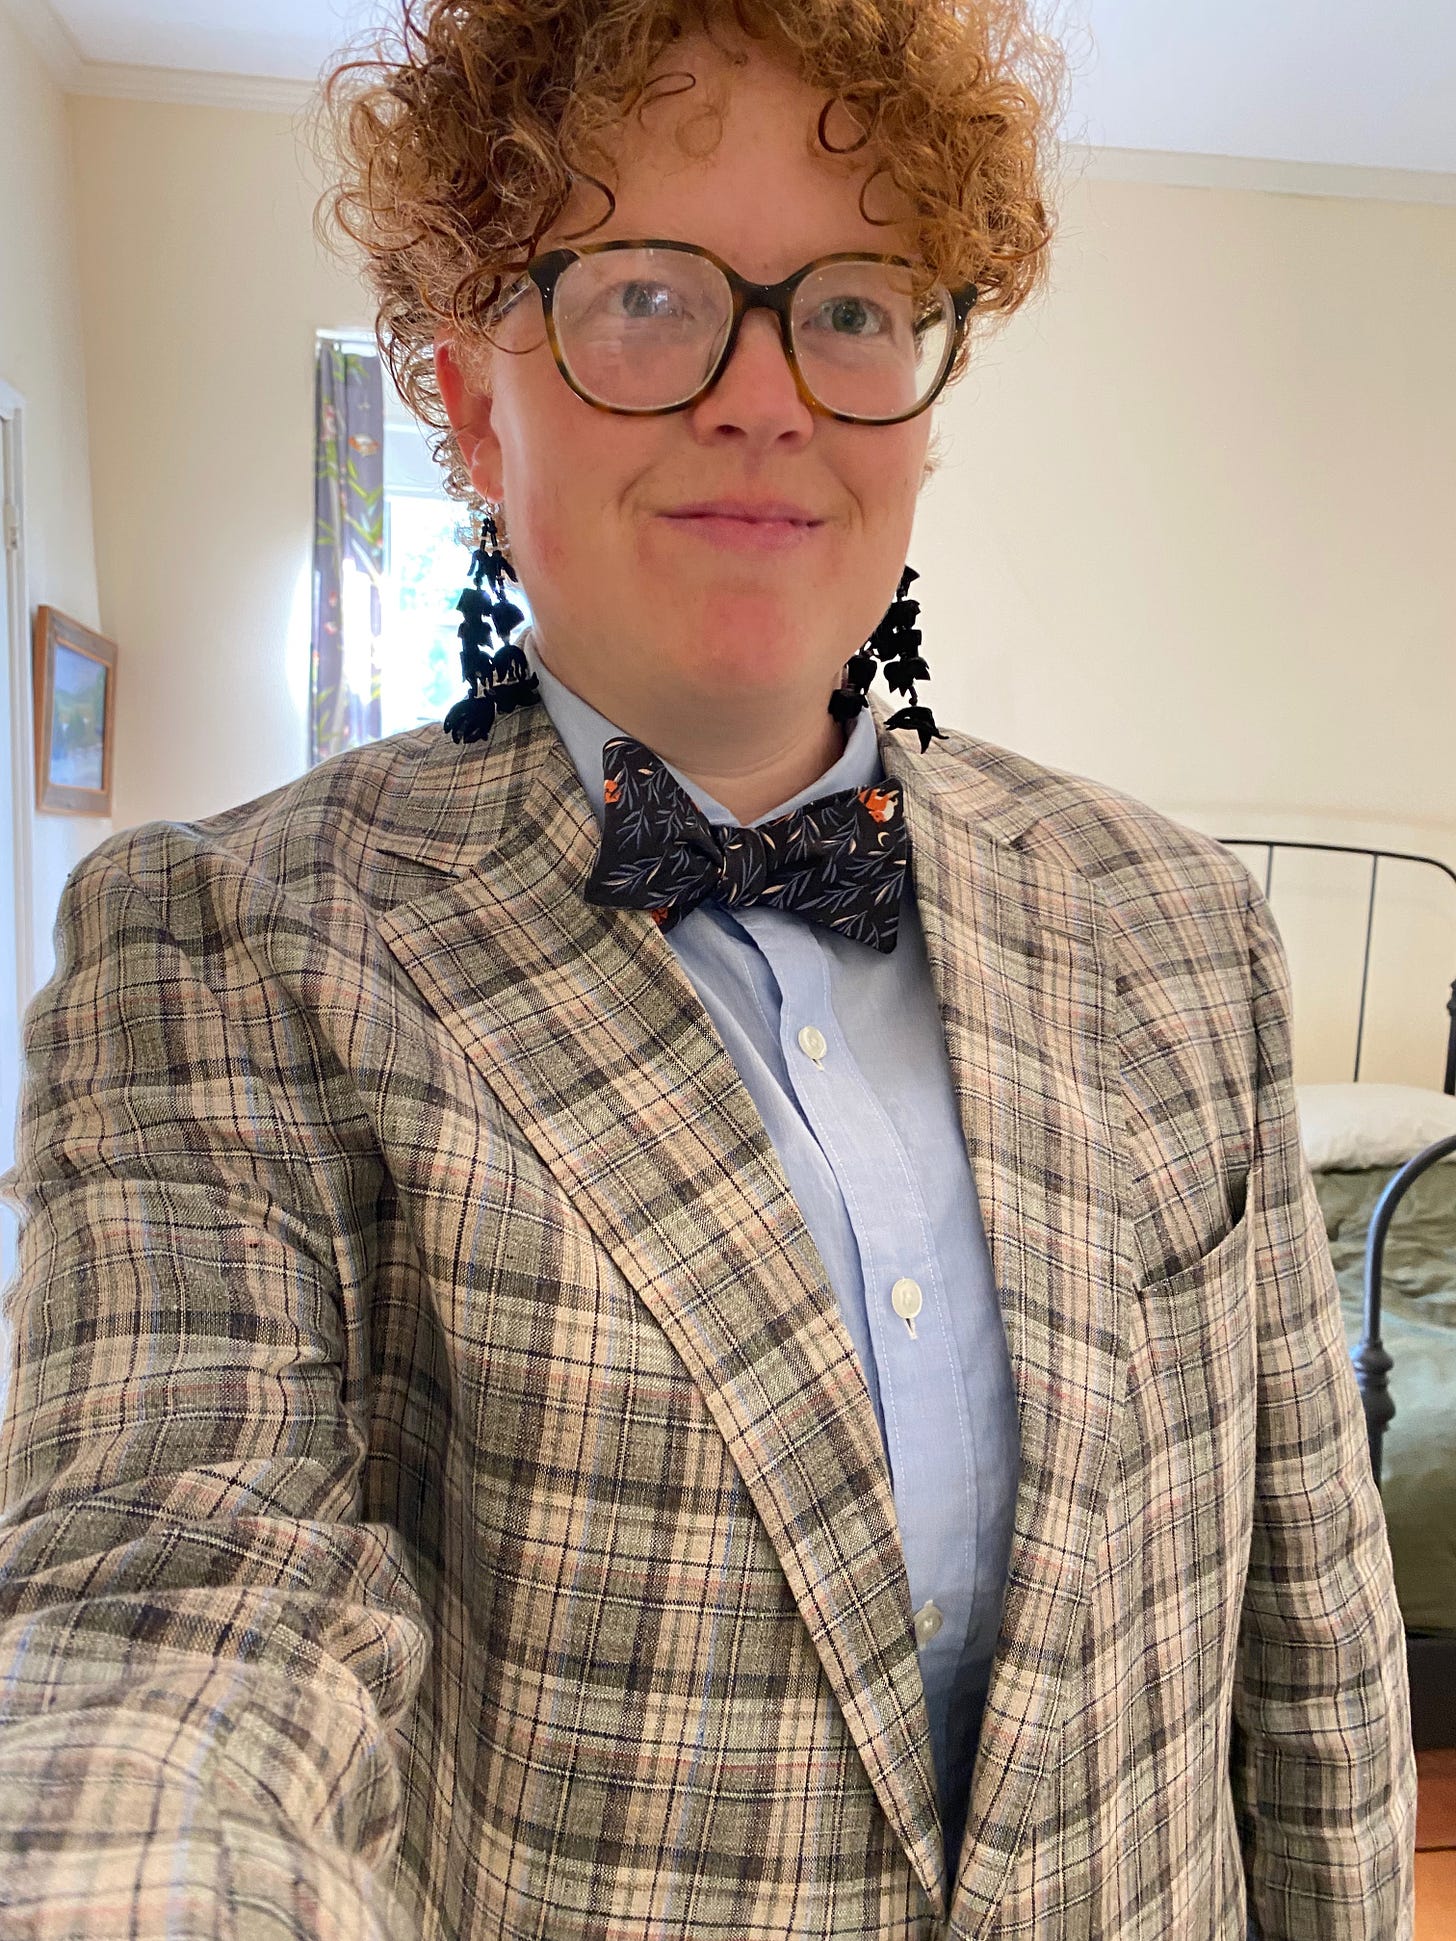 I am standing in a bedroom, wearing a blue button-down shirt and a green, brown, and pink patterned jacked. I have on long dangly black earrings made of folded pieces of fabric, and a bowtie patterned with foxes and small grasses. I have short red curly hair and big glasses, and I am smiling slightly.